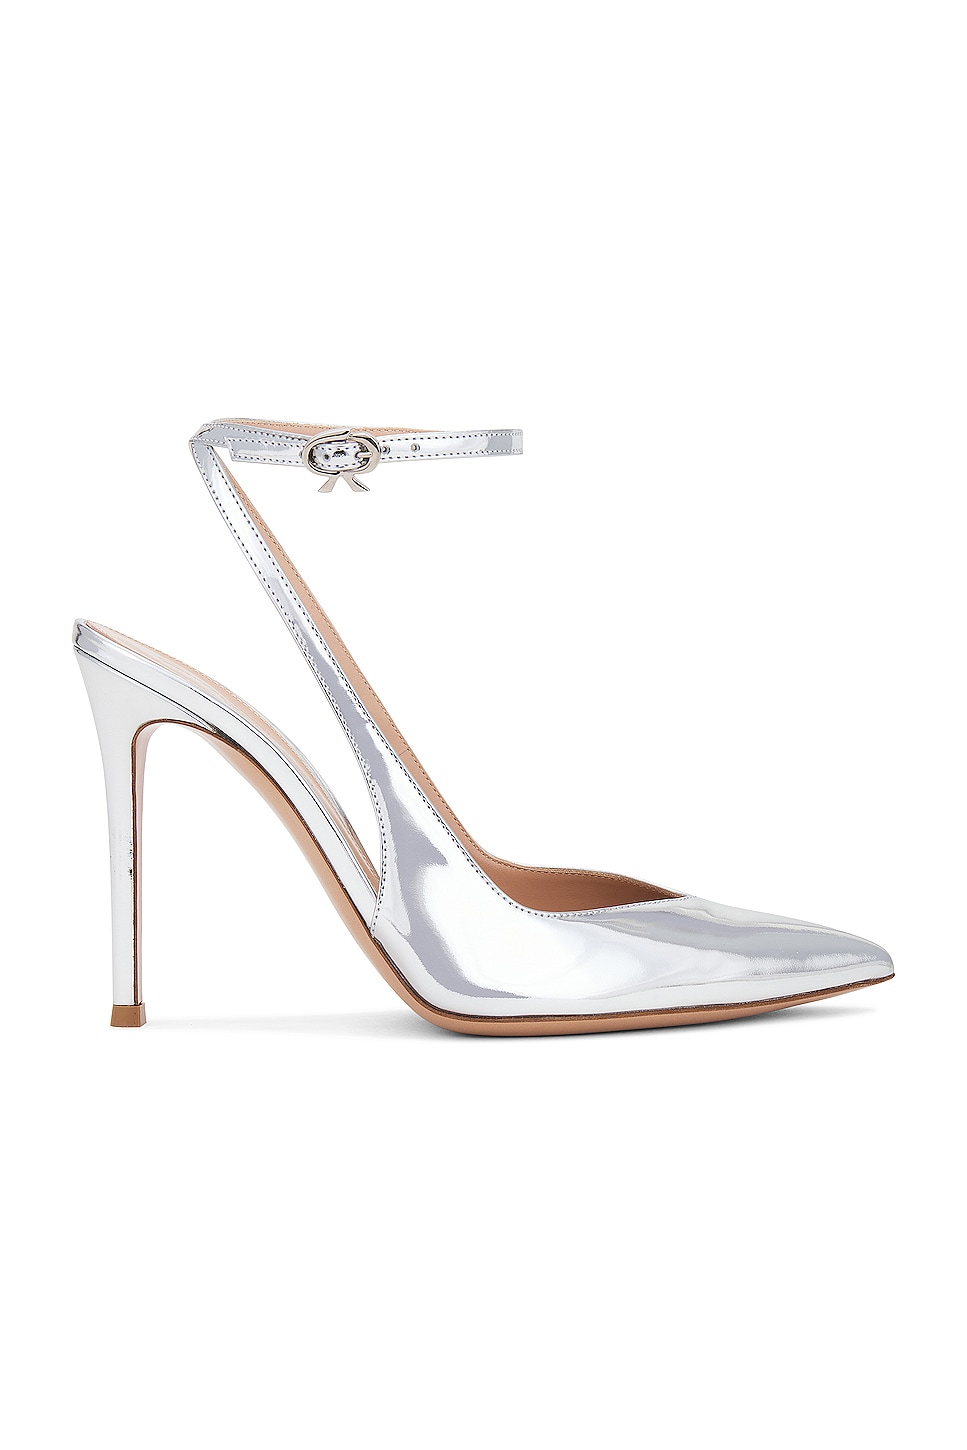 Image 1 of Gianvito Rossi Sling Back Pump in Silver